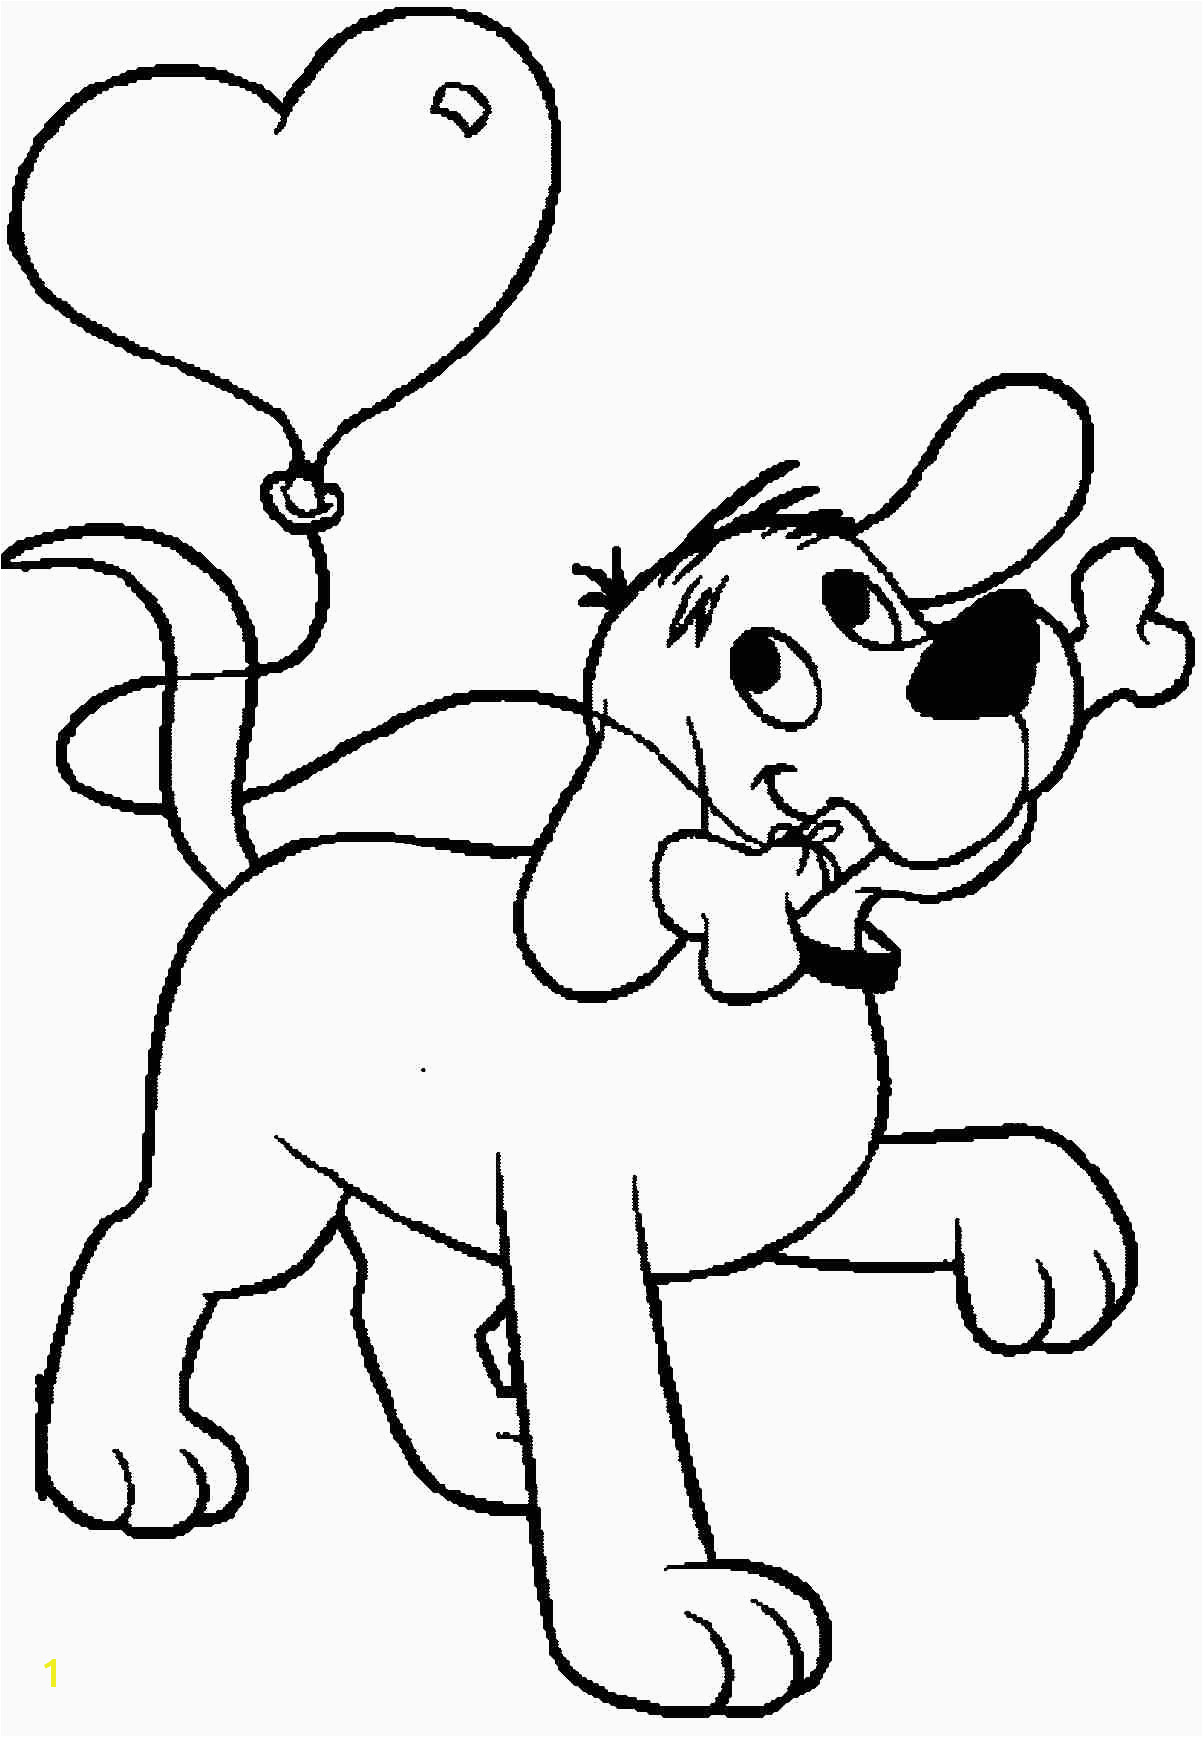 Clifford the Big Red Dog Coloring Pages Clifford Coloring Pages